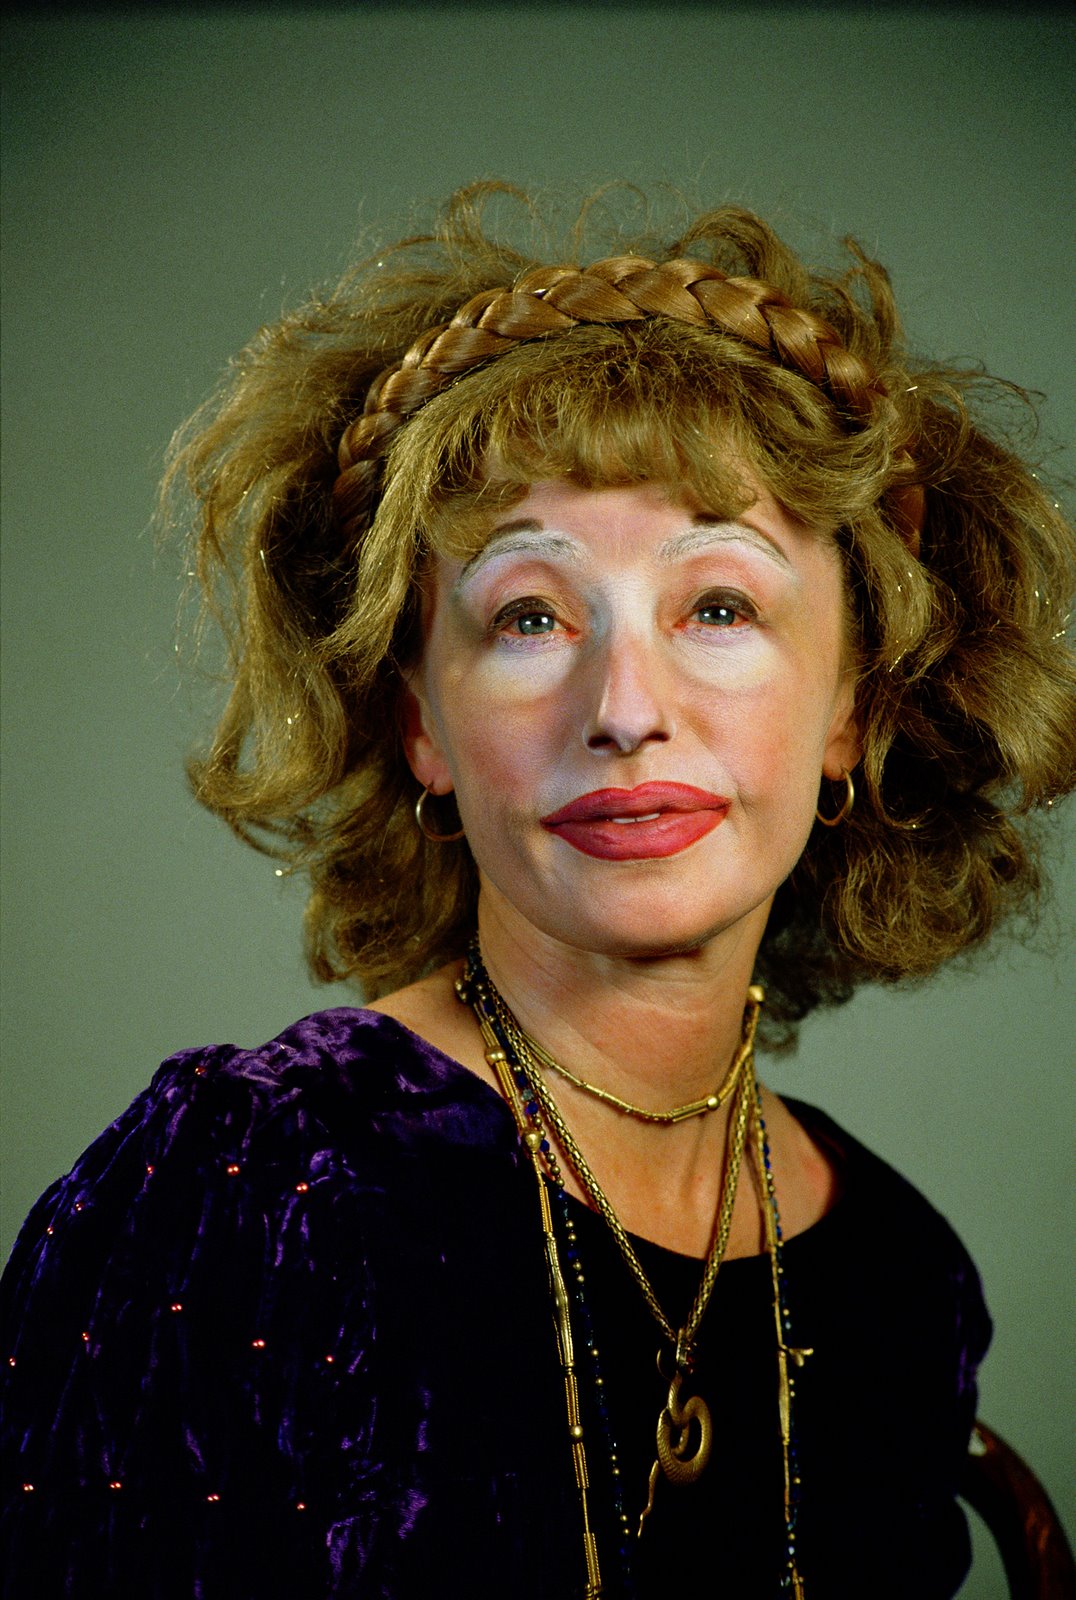 The Thousand Lives of Cindy Sherman — Blind Magazine